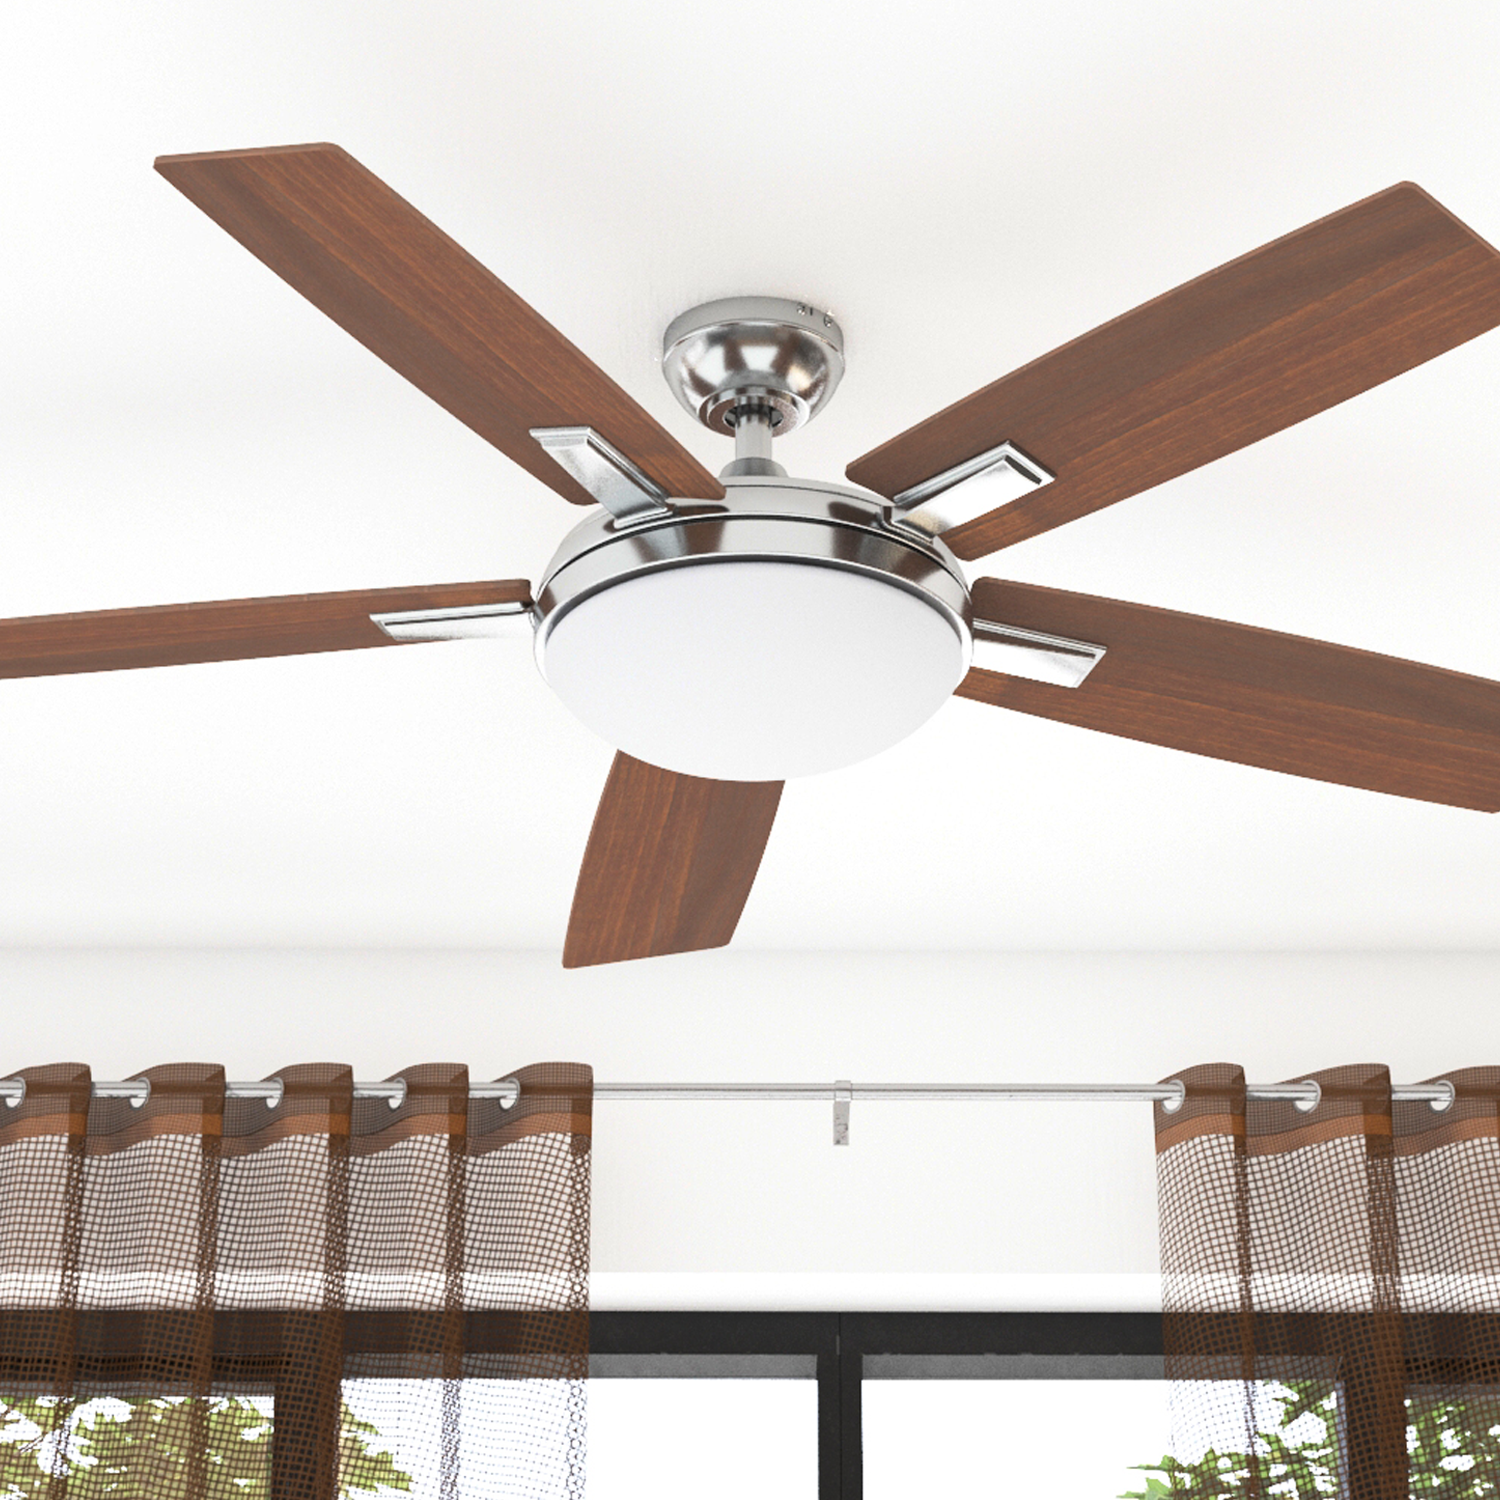 52 Inch Emporia, Brushed Nickel, Remote Control, Ceiling Fan by Prominence Home